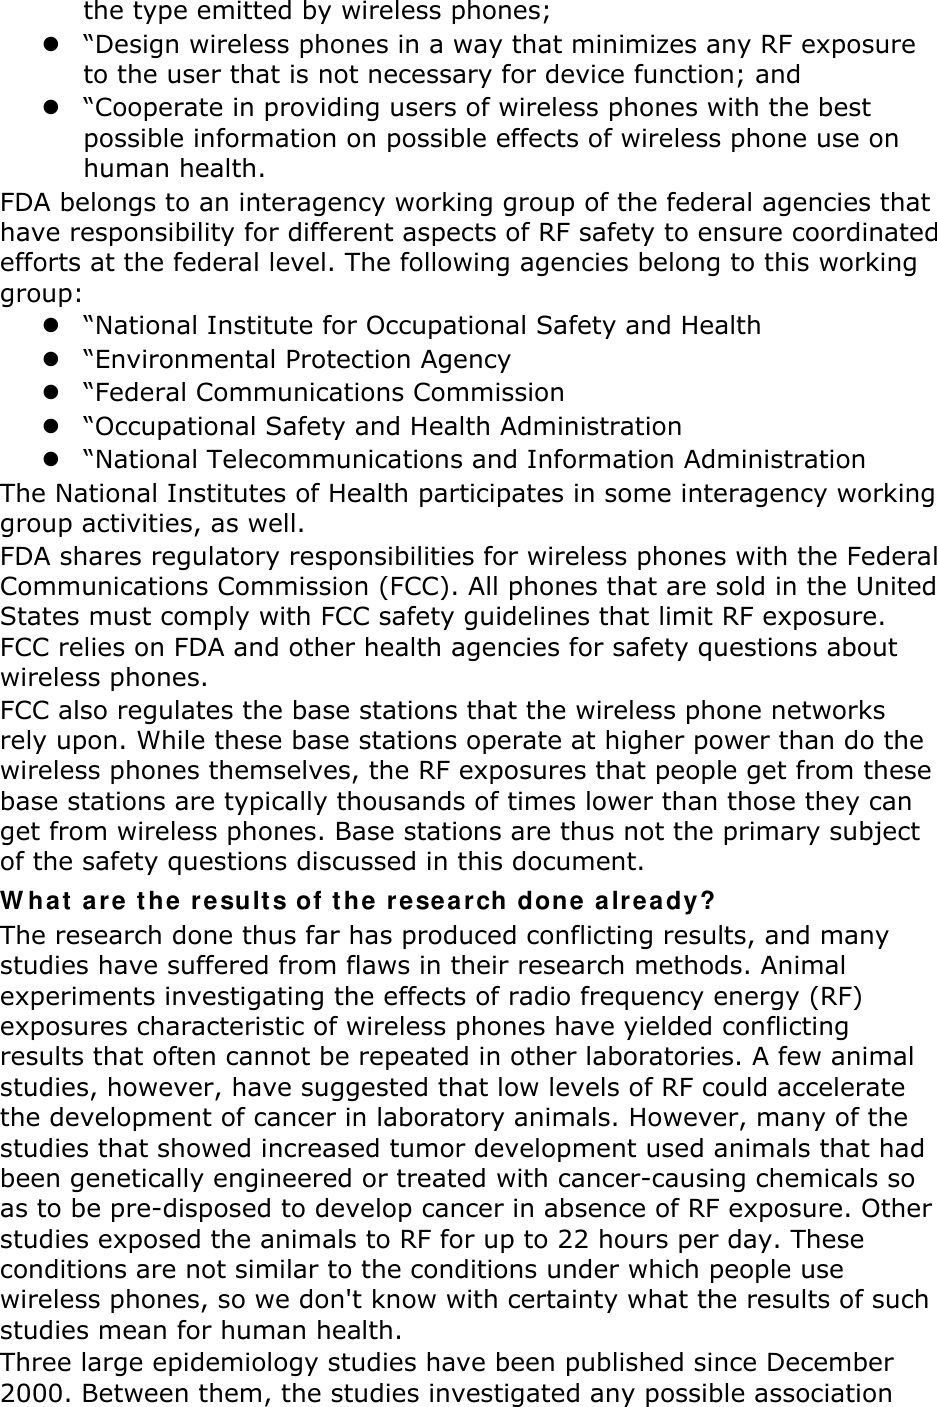 the type emitted by wireless phones;  “Design wireless phones in a way that minimizes any RF exposure to the user that is not necessary for device function; and  “Cooperate in providing users of wireless phones with the best possible information on possible effects of wireless phone use on human health. FDA belongs to an interagency working group of the federal agencies that have responsibility for different aspects of RF safety to ensure coordinated efforts at the federal level. The following agencies belong to this working group:  “National Institute for Occupational Safety and Health  “Environmental Protection Agency  “Federal Communications Commission  “Occupational Safety and Health Administration  “National Telecommunications and Information Administration The National Institutes of Health participates in some interagency working group activities, as well. FDA shares regulatory responsibilities for wireless phones with the Federal Communications Commission (FCC). All phones that are sold in the United States must comply with FCC safety guidelines that limit RF exposure. FCC relies on FDA and other health agencies for safety questions about wireless phones. FCC also regulates the base stations that the wireless phone networks rely upon. While these base stations operate at higher power than do the wireless phones themselves, the RF exposures that people get from these base stations are typically thousands of times lower than those they can get from wireless phones. Base stations are thus not the primary subject of the safety questions discussed in this document. What are the results of the research done already? The research done thus far has produced conflicting results, and many studies have suffered from flaws in their research methods. Animal experiments investigating the effects of radio frequency energy (RF) exposures characteristic of wireless phones have yielded conflicting results that often cannot be repeated in other laboratories. A few animal studies, however, have suggested that low levels of RF could accelerate the development of cancer in laboratory animals. However, many of the studies that showed increased tumor development used animals that had been genetically engineered or treated with cancer-causing chemicals so as to be pre-disposed to develop cancer in absence of RF exposure. Other studies exposed the animals to RF for up to 22 hours per day. These conditions are not similar to the conditions under which people use wireless phones, so we don&apos;t know with certainty what the results of such studies mean for human health. Three large epidemiology studies have been published since December 2000. Between them, the studies investigated any possible association 